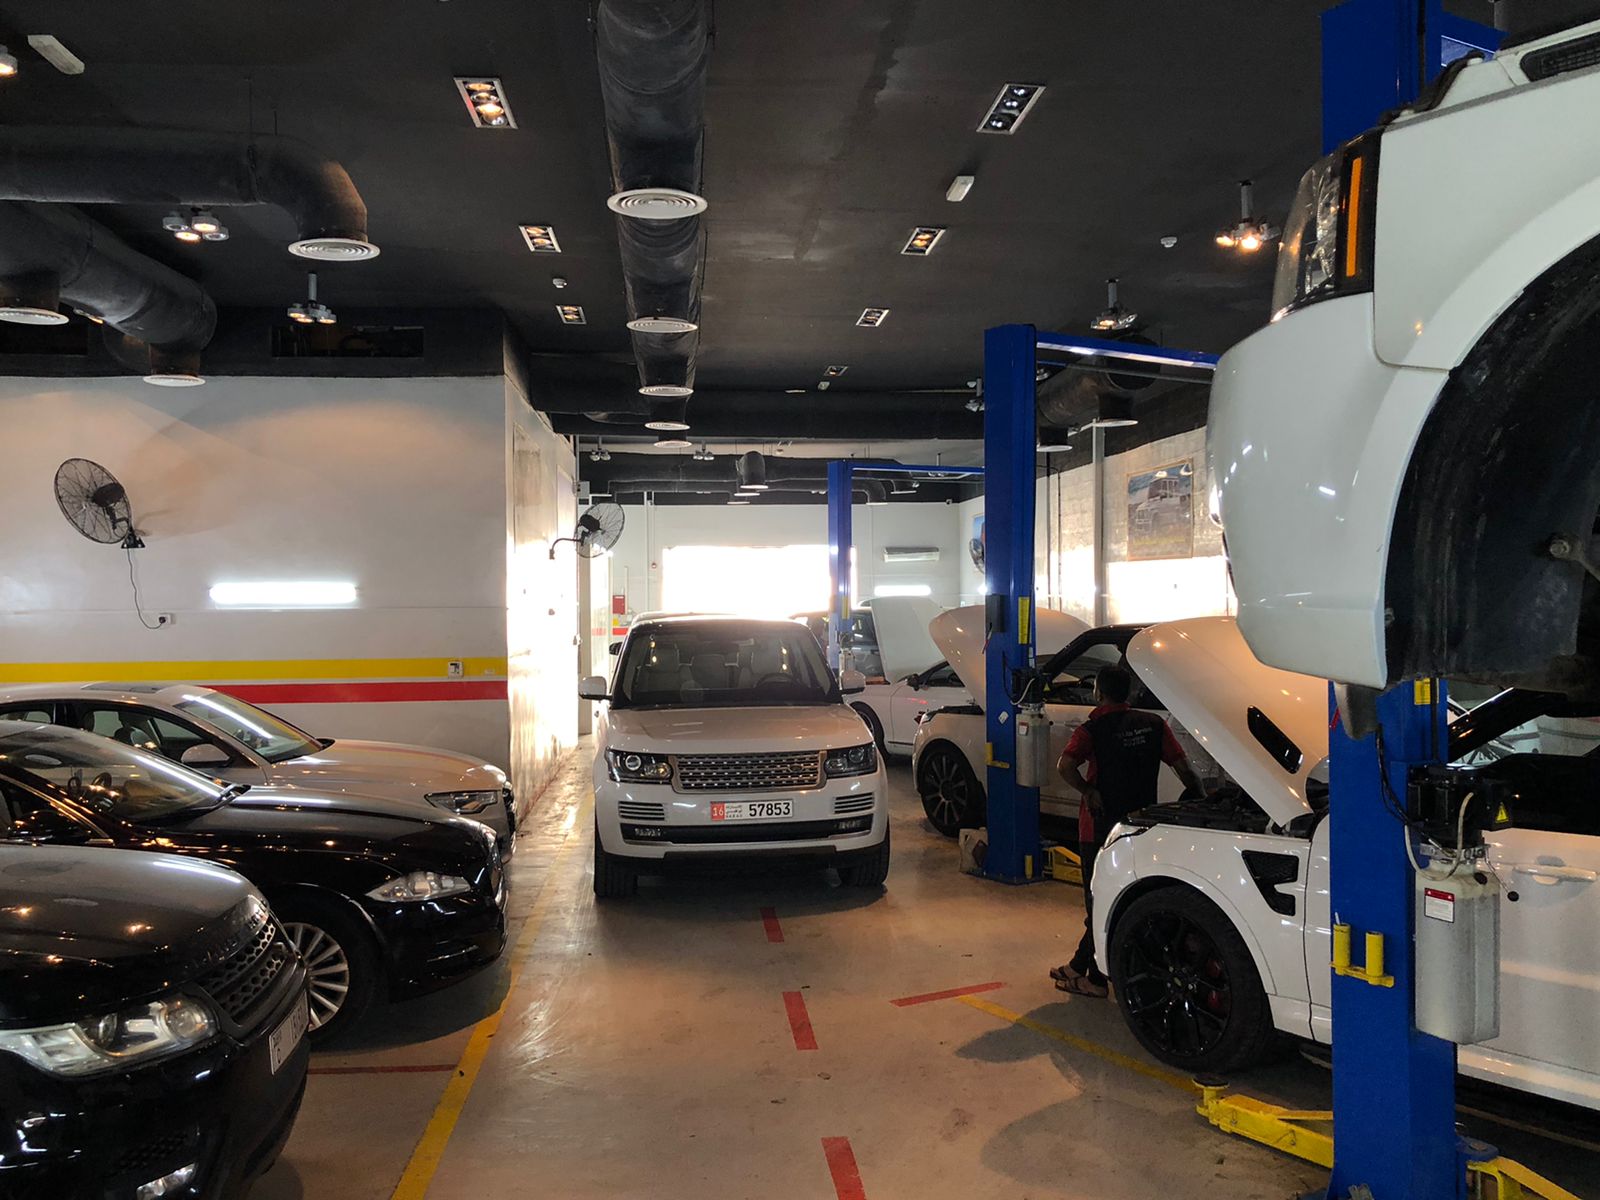 Range Rover And Rolls Royce Services Workshop In Dubai